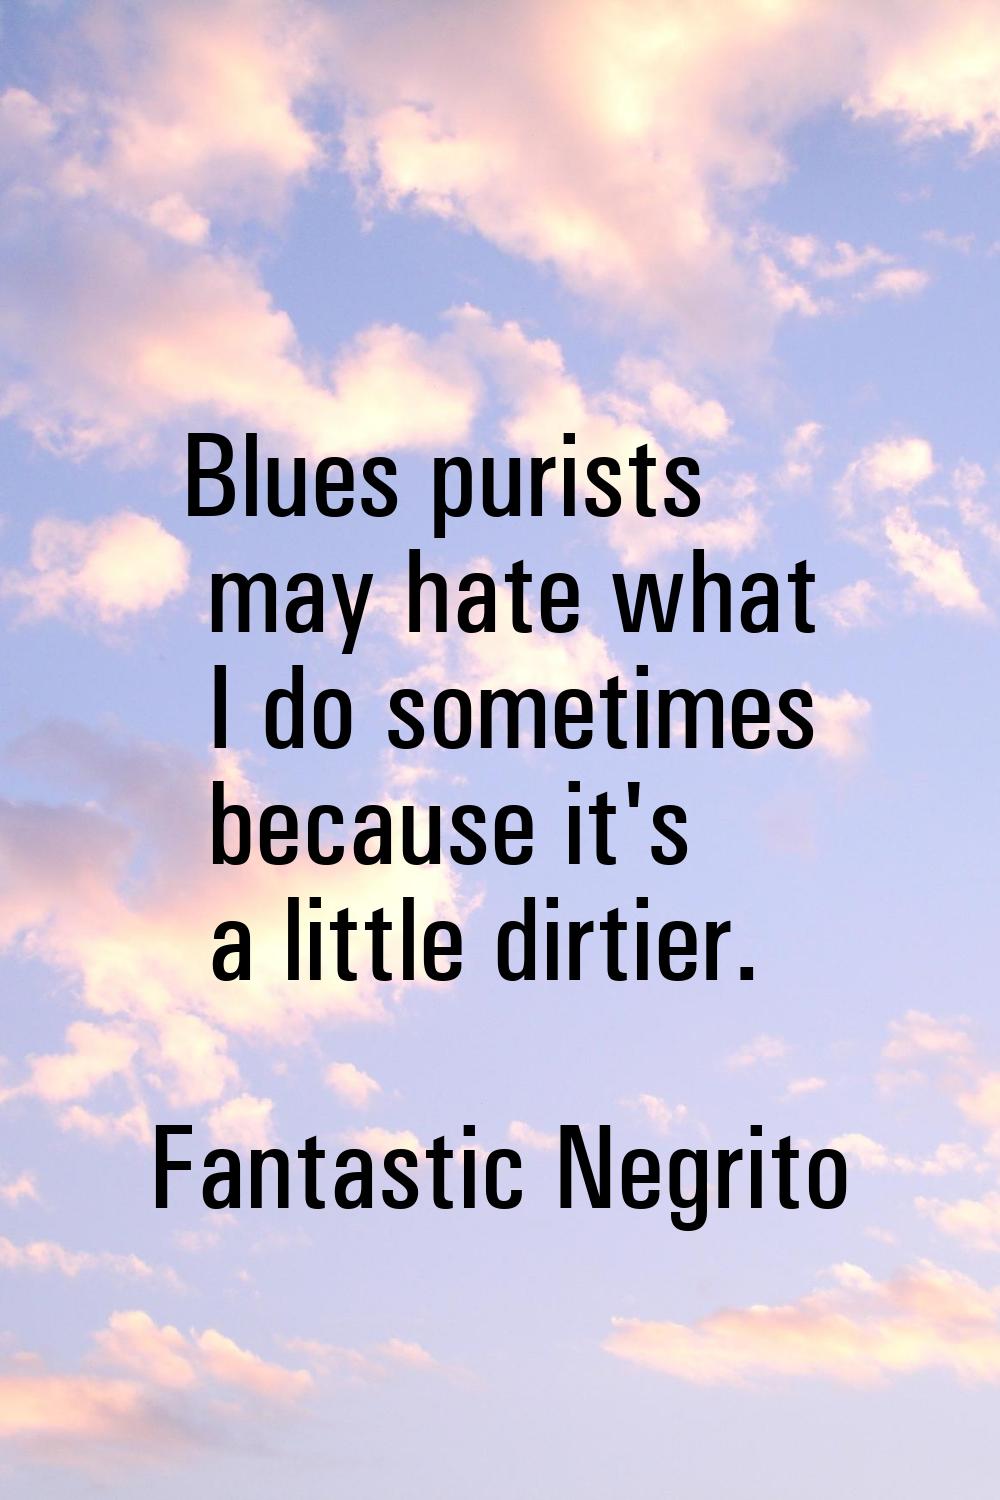 Blues purists may hate what I do sometimes because it's a little dirtier.